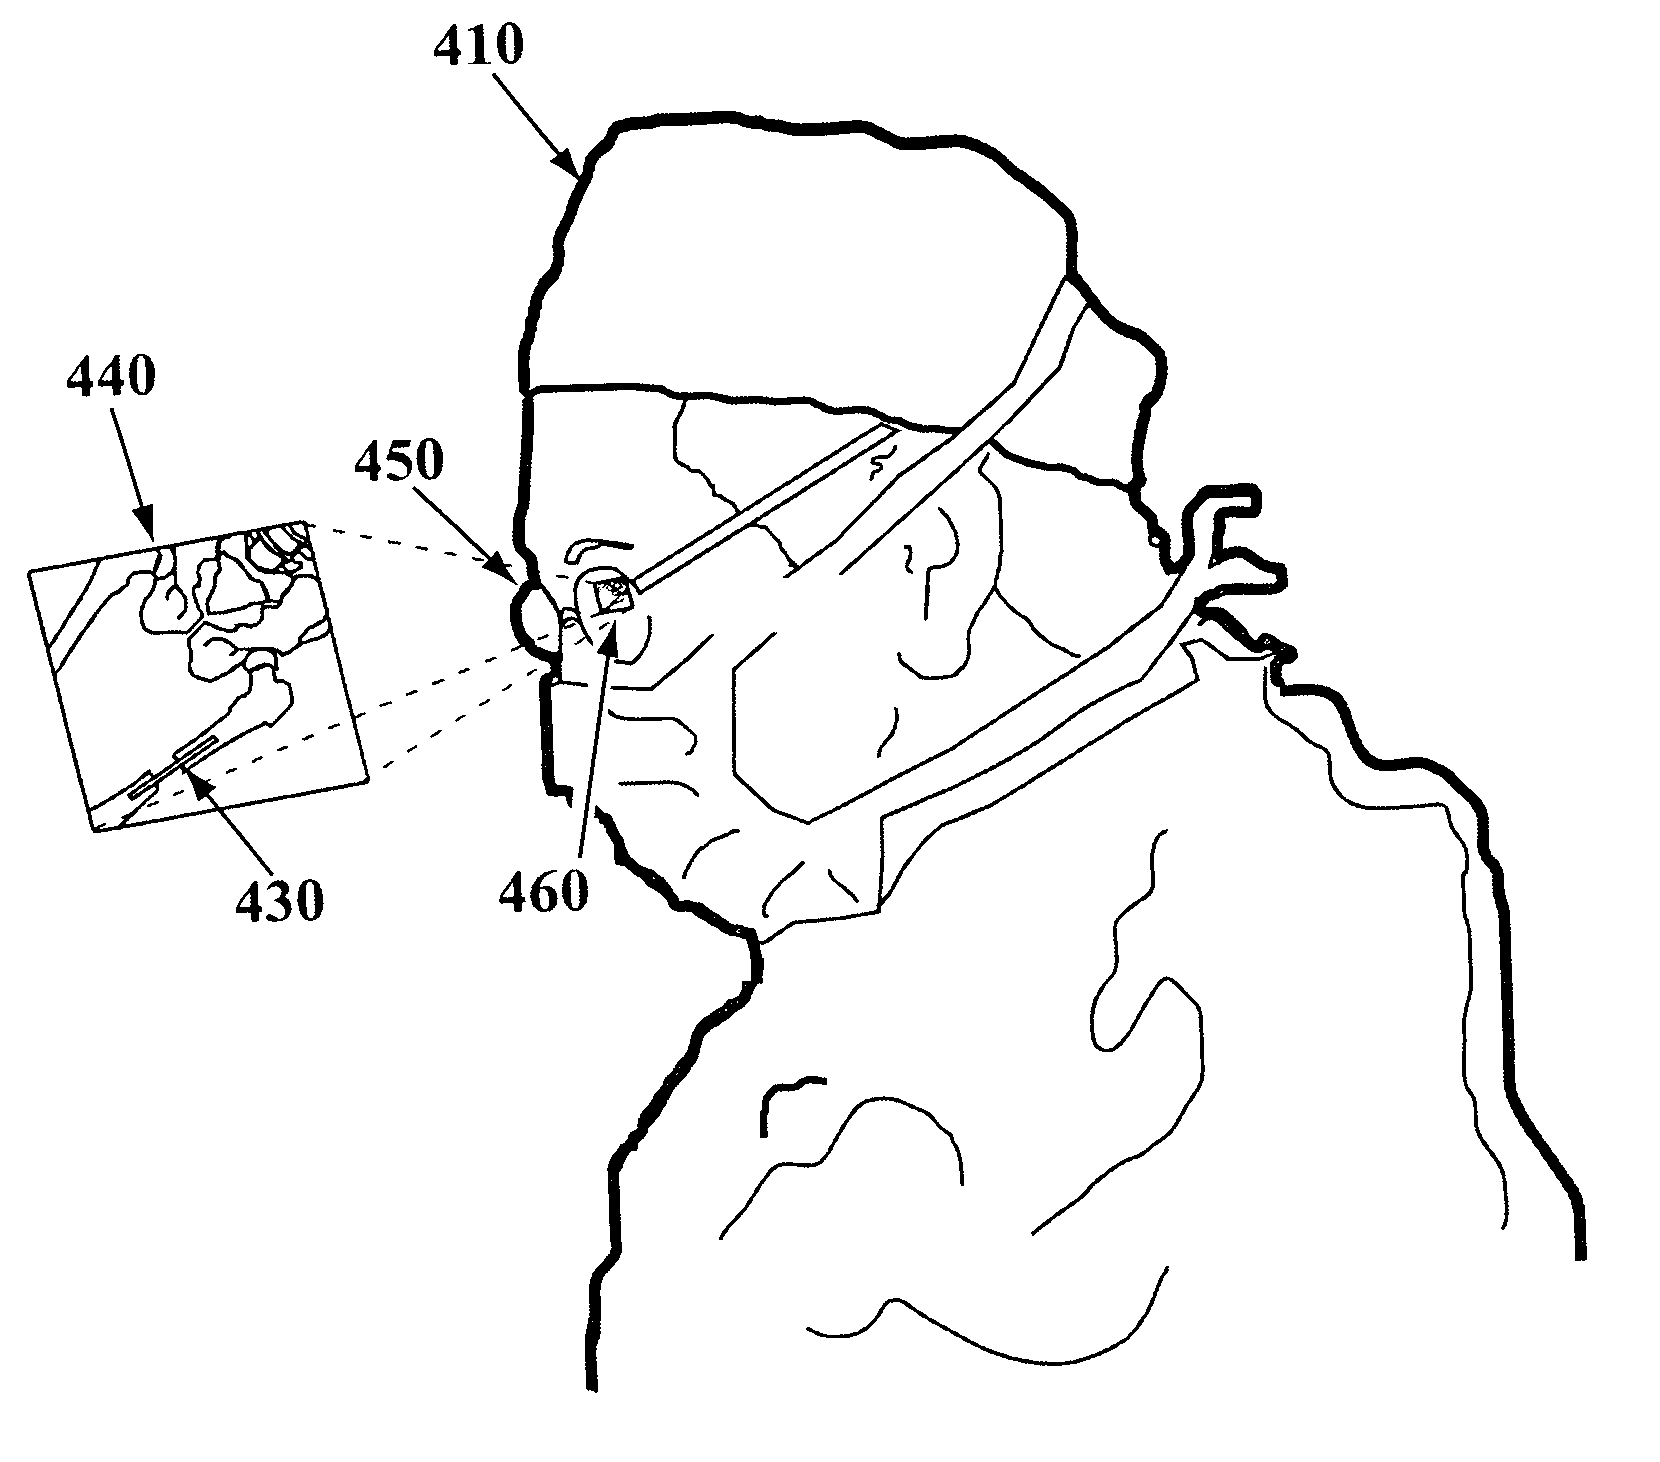 Apparatus for providing visual data during an operation